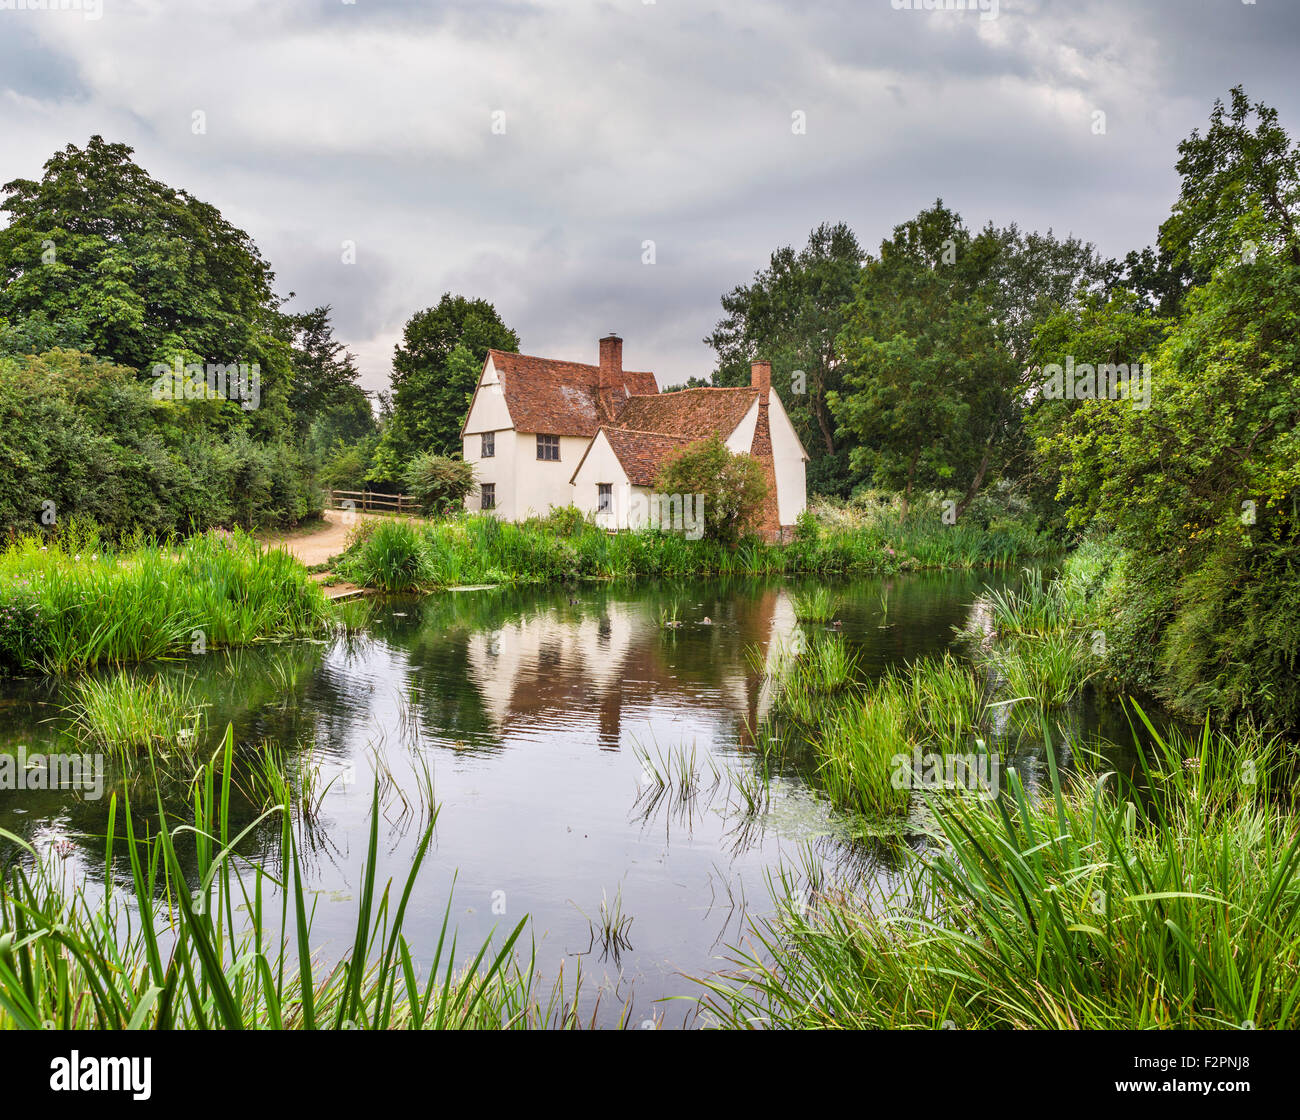 Willy Lott’s Cottage at Flatford Mill, featured in Constable’s painting 'The Hay Wain', East Bergholt, Dedham Vale, Essex, UK Stock Photo